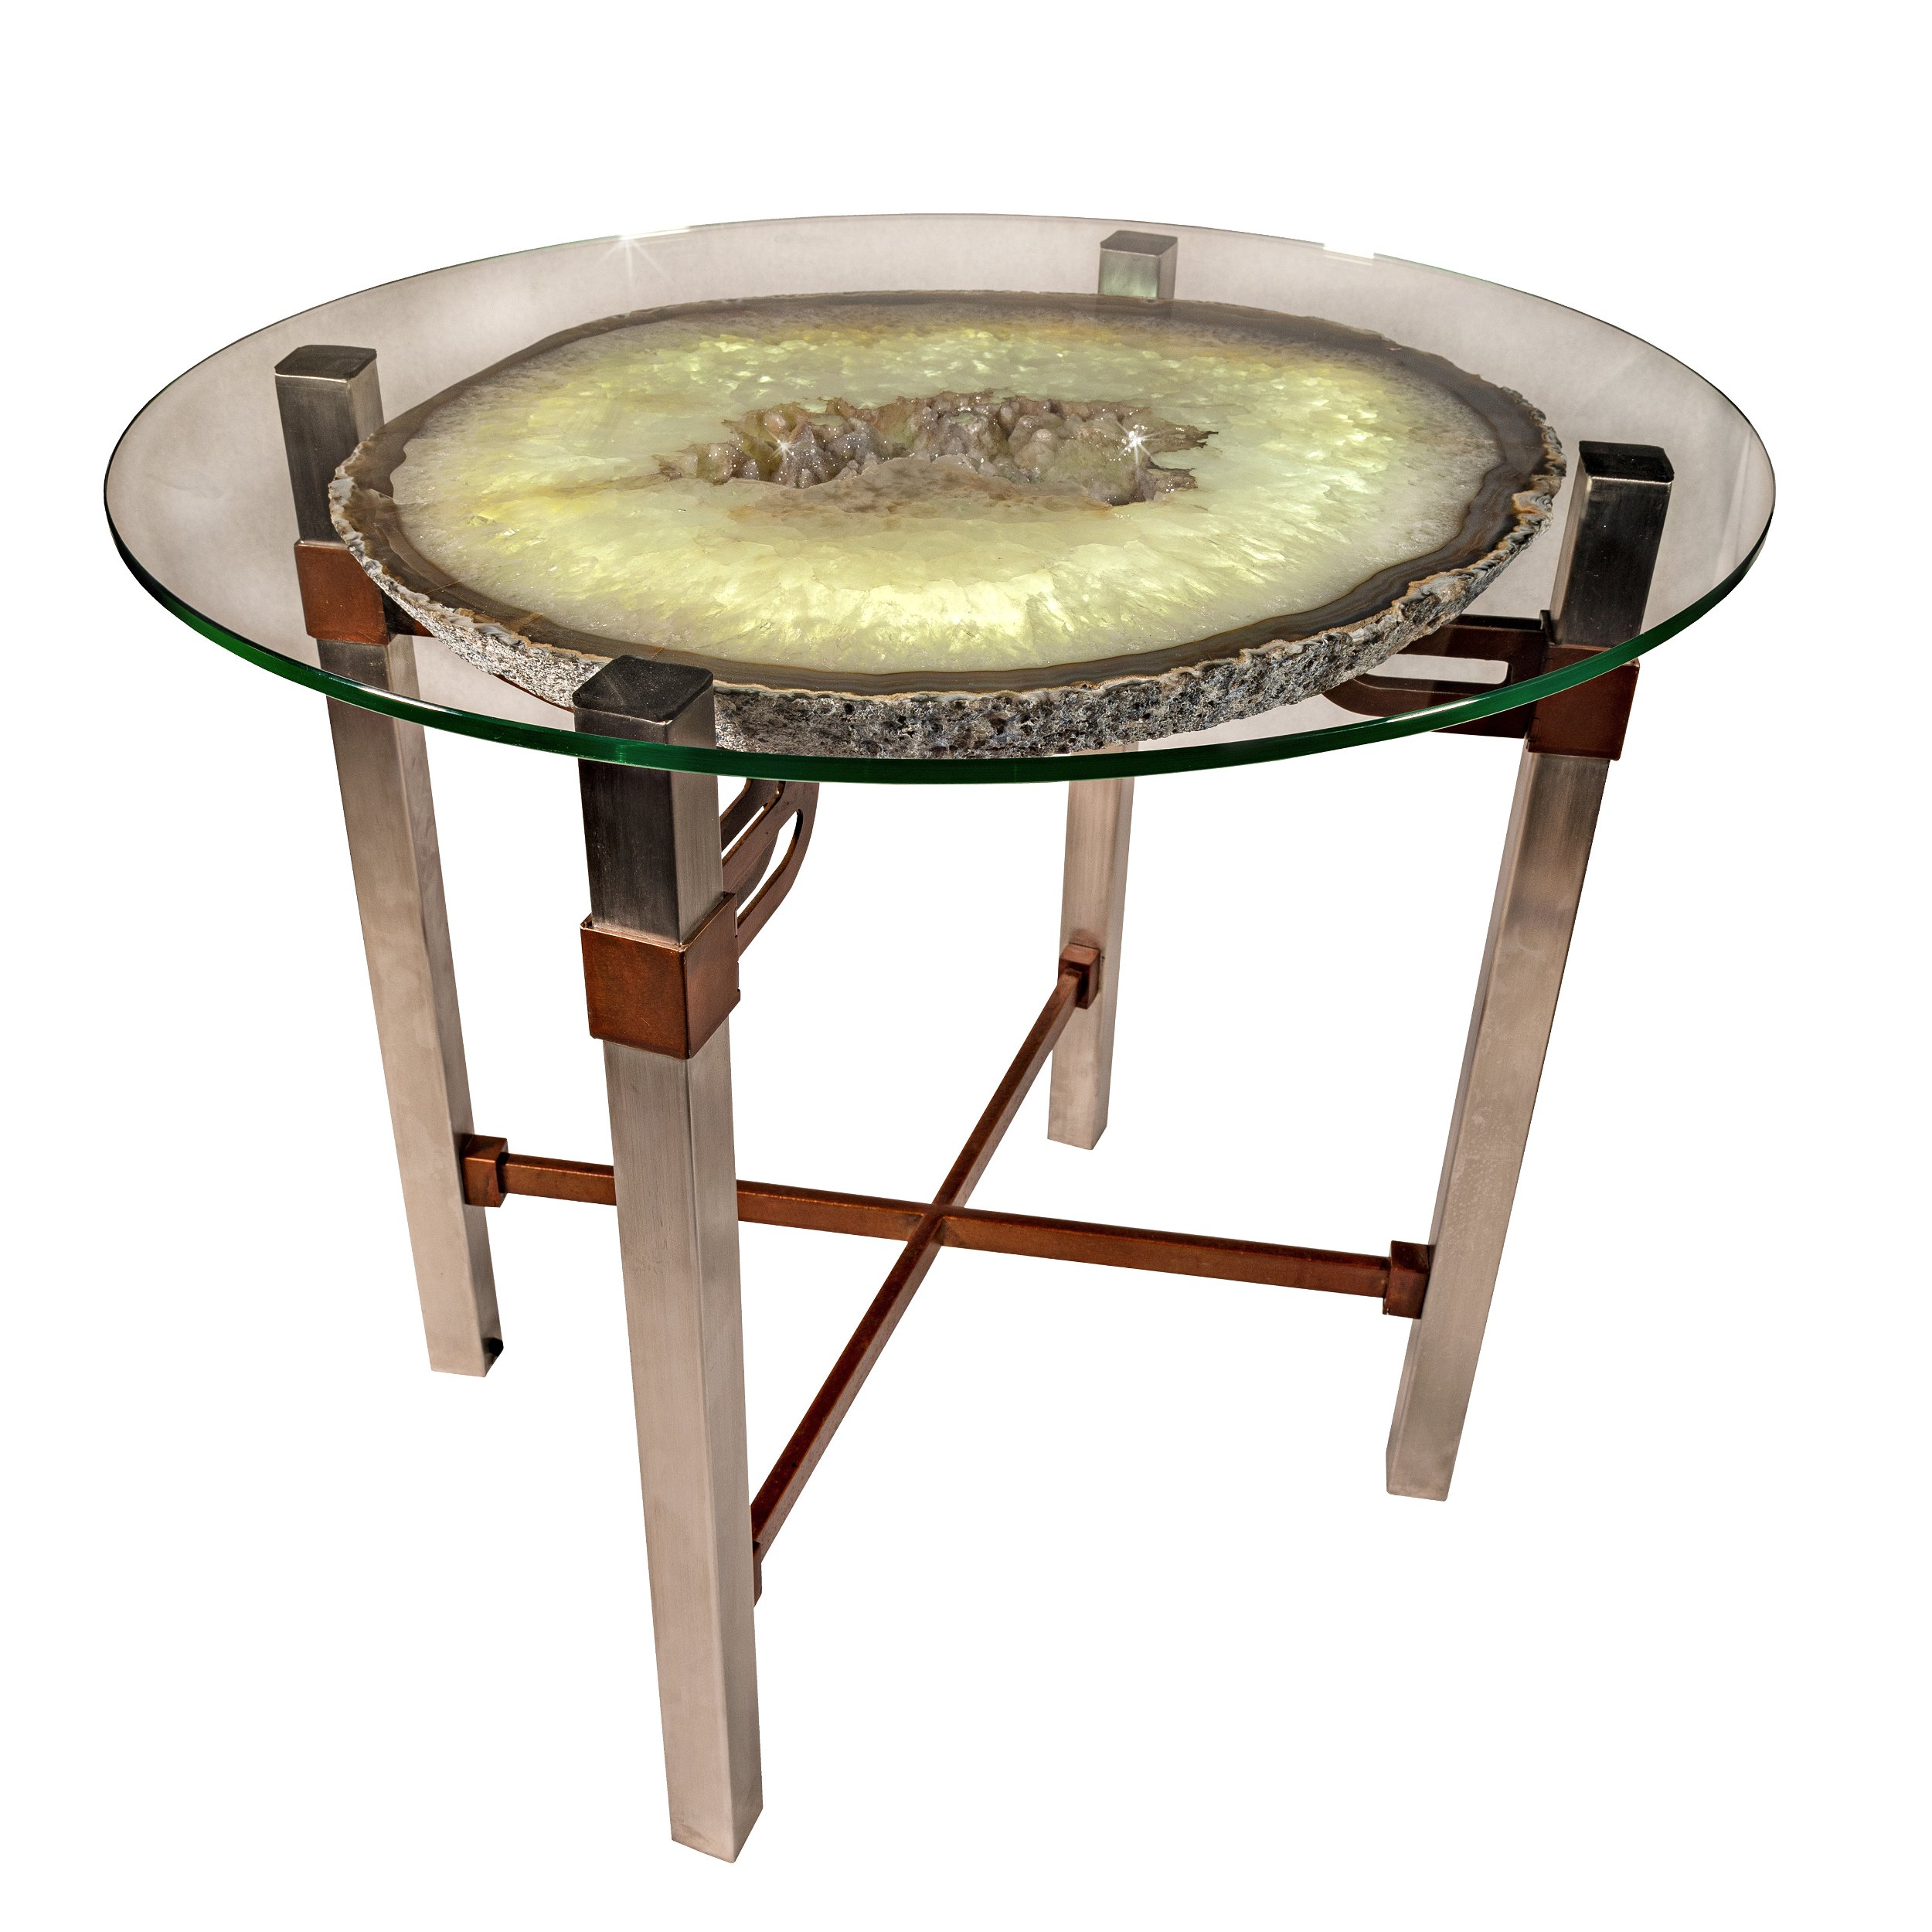 Agate Slice Custom Table With Glass - Oval With Druze Vug Coffee Tones